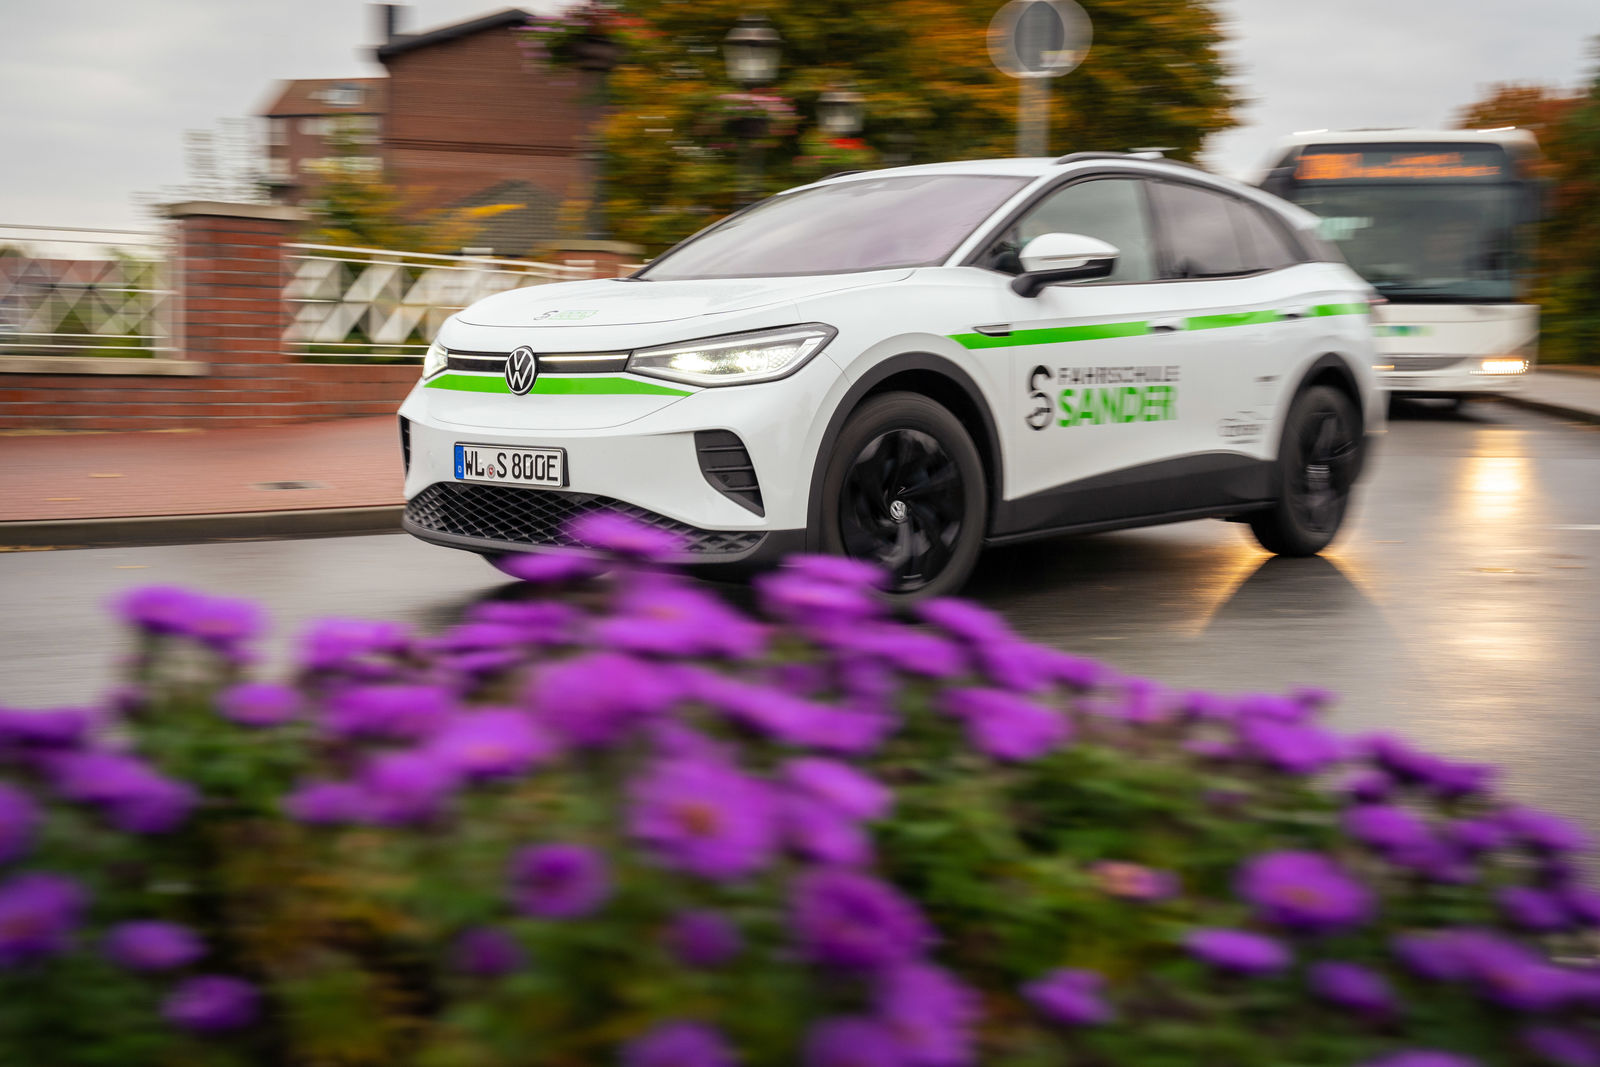 Learning to drive in an electric car - “E-mobility in driving schools is a hot topic”